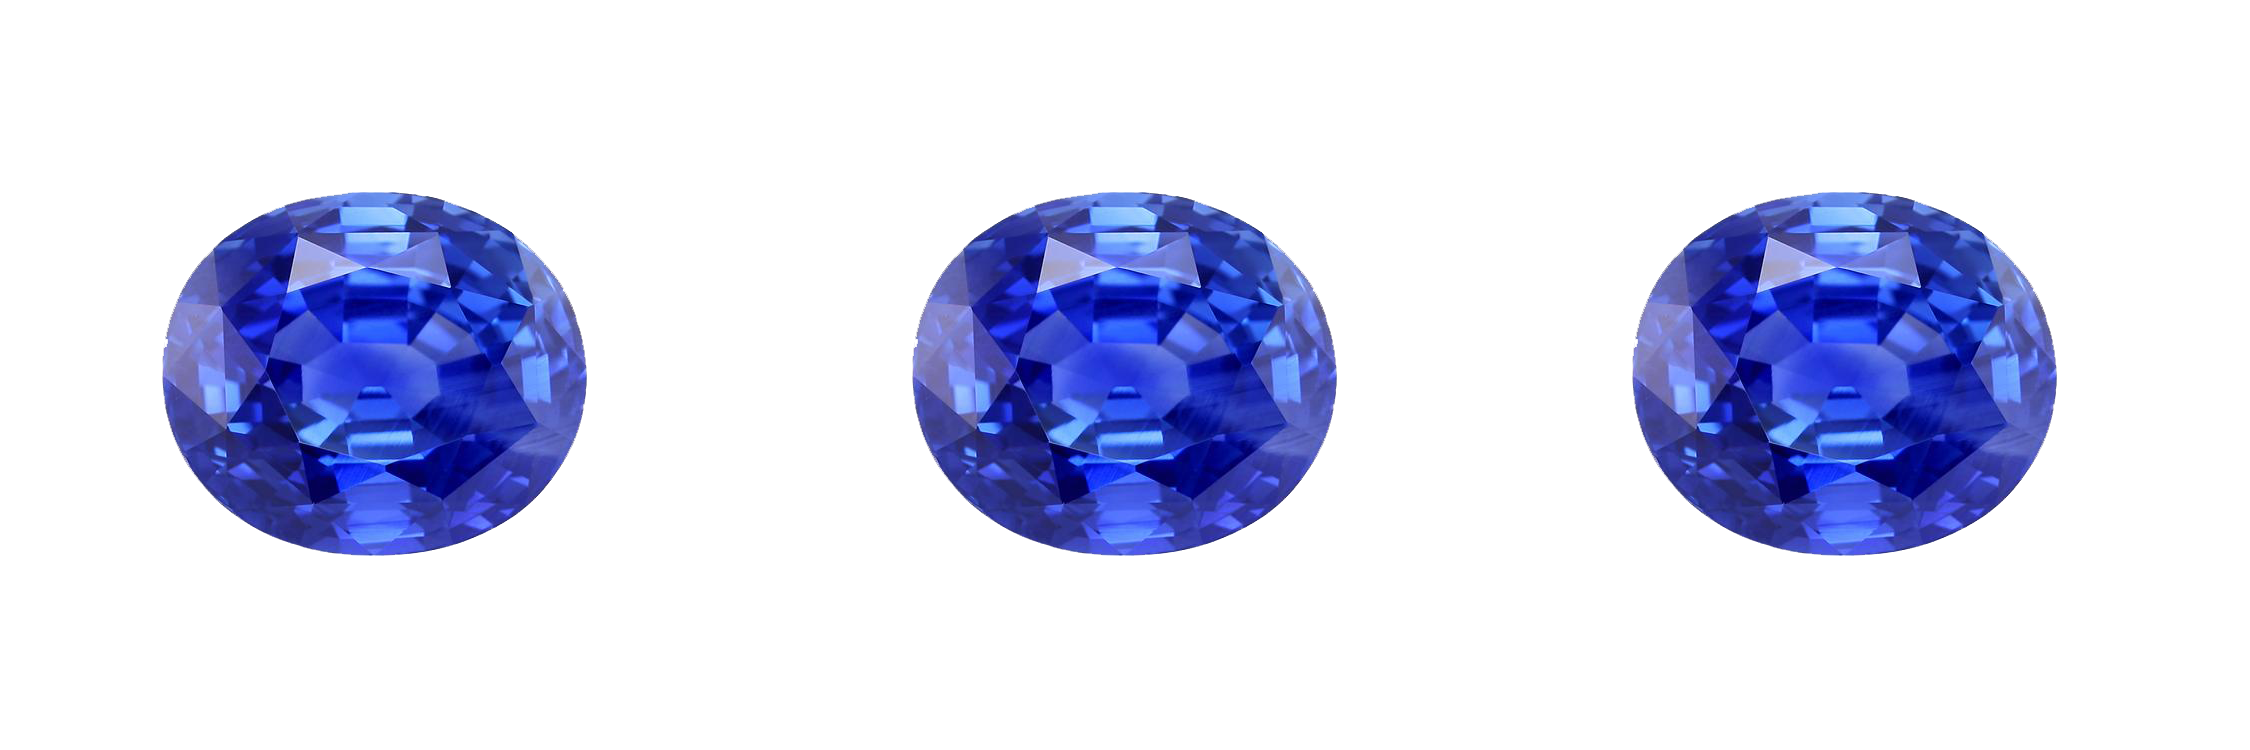 Sapphire Stone Free PNG Image